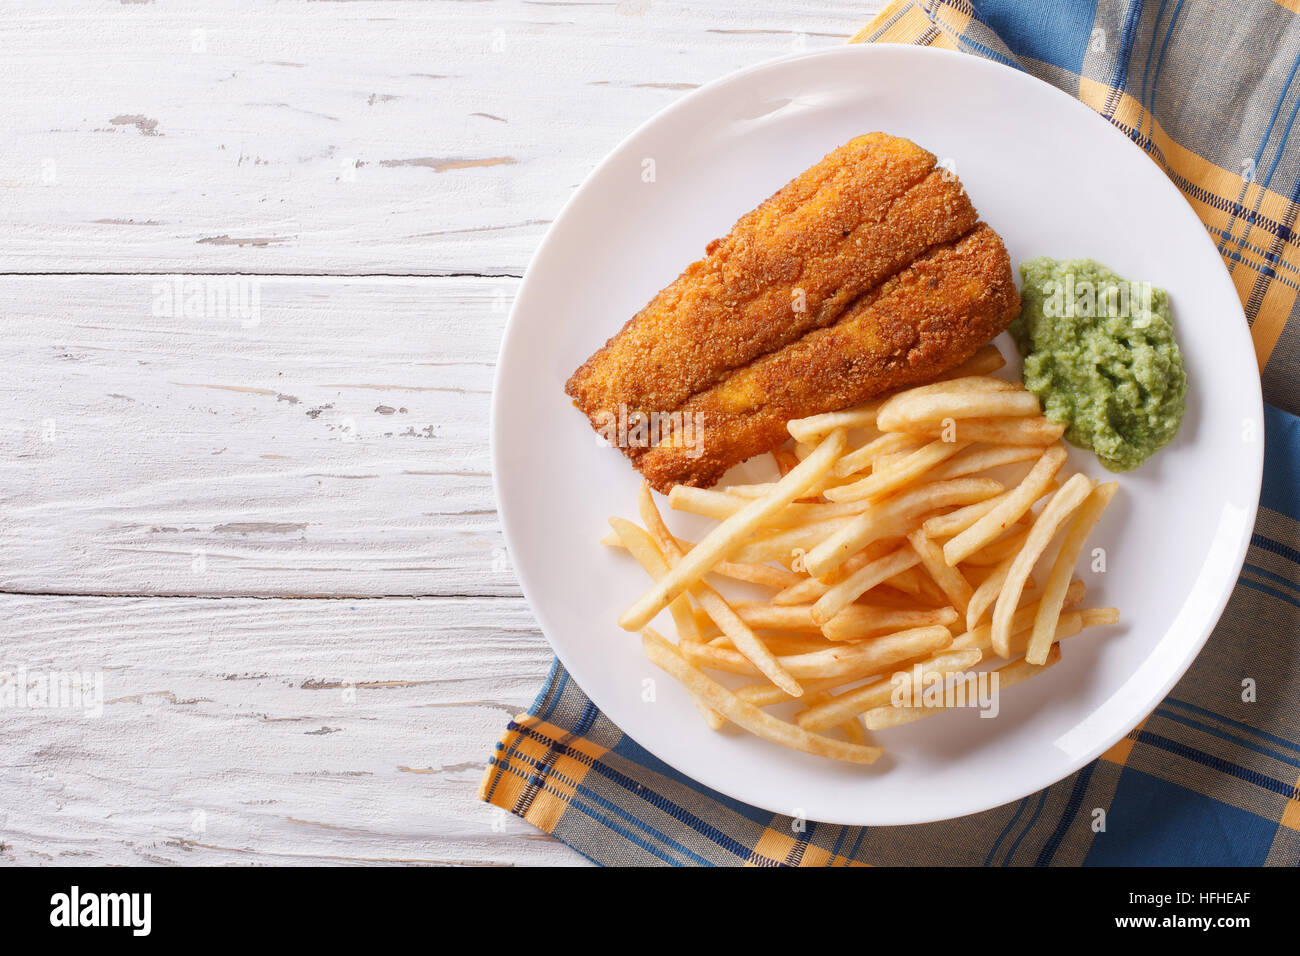 English food: fried fish in batter with chips and pea puree on a plate. horizontal view from above Stock Photo